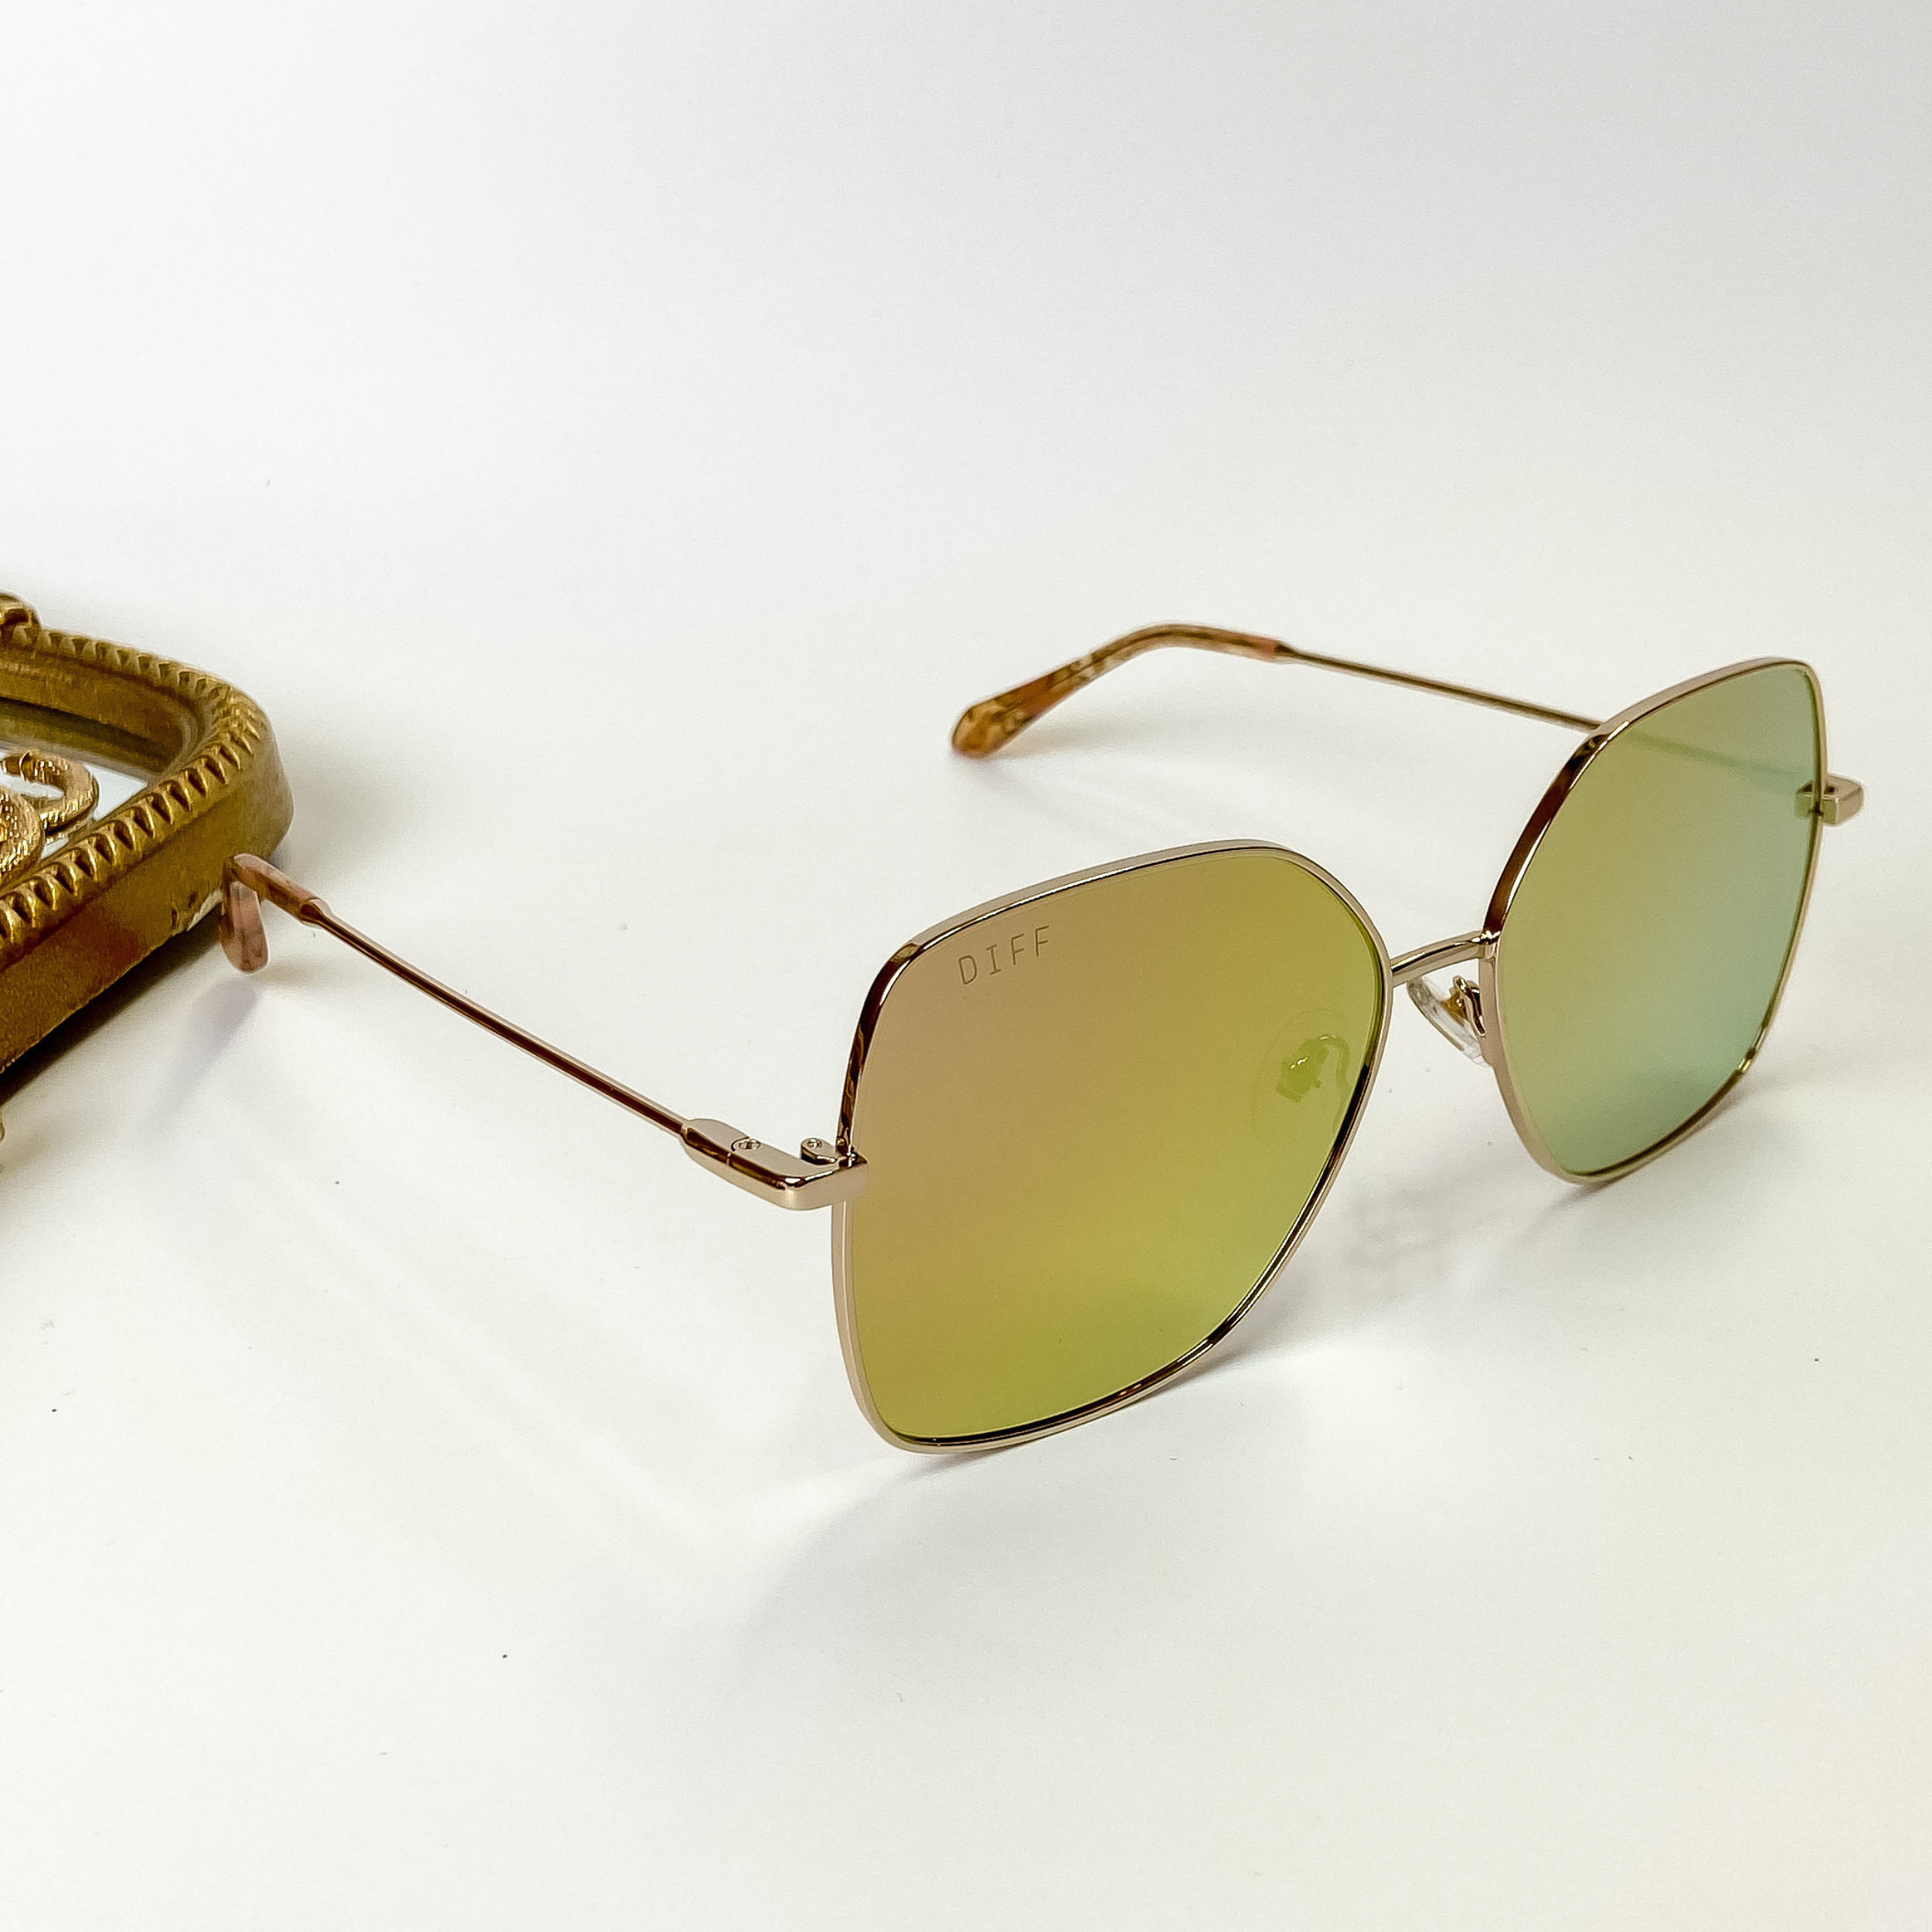 A pair of gold tone frame sunglasses with pink ad yellow mirror lenses. These sunglasses are pictured on a white background with gold jewelry.